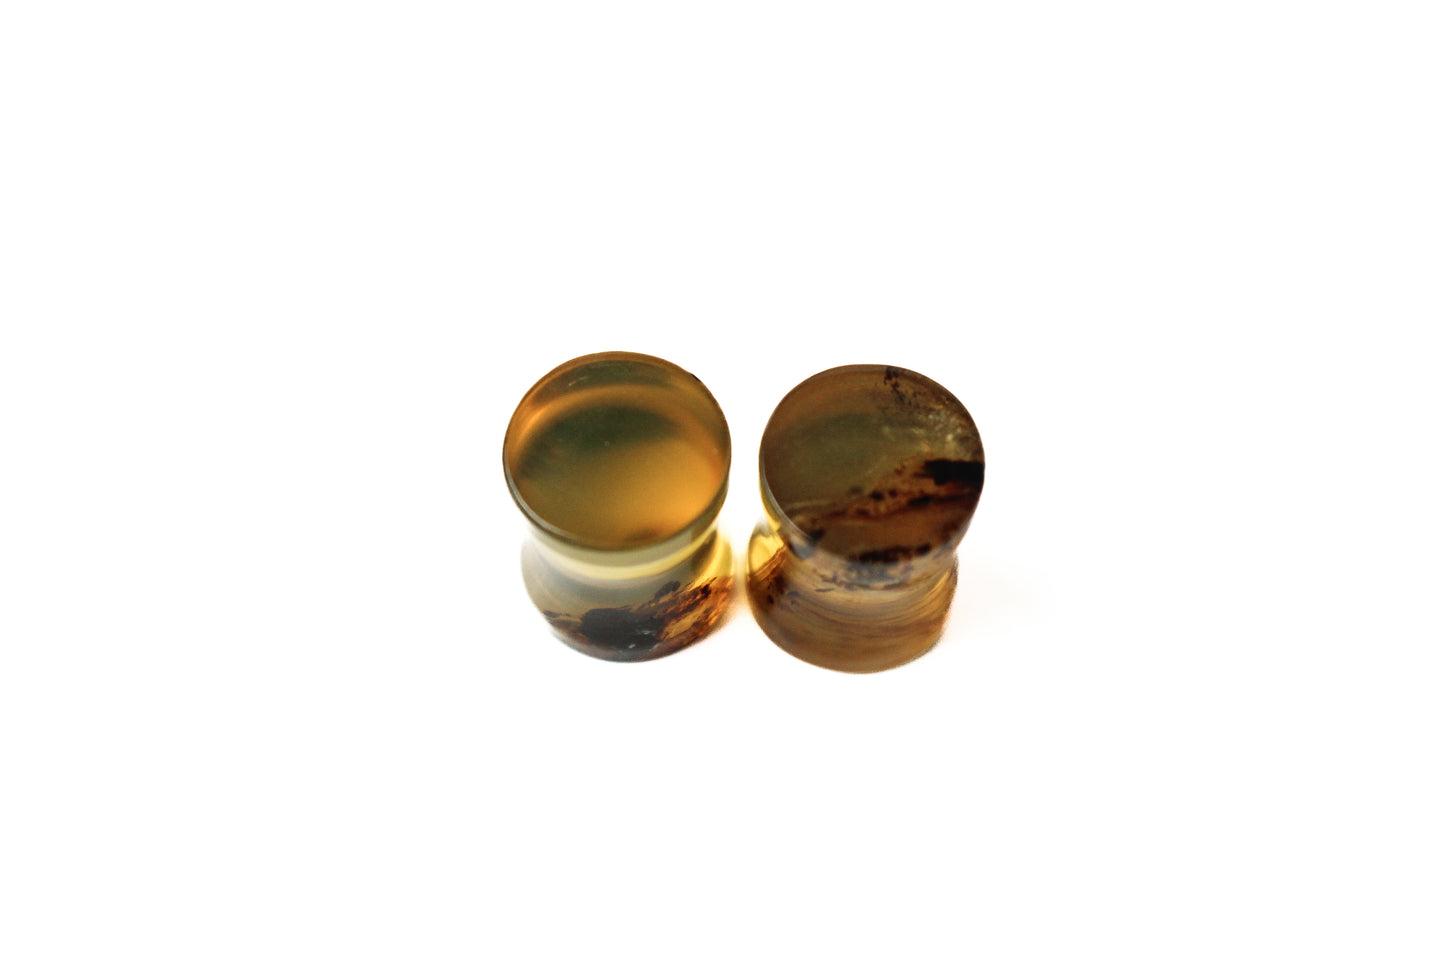 10mm - Chiapas Amber Double Flare Plugs